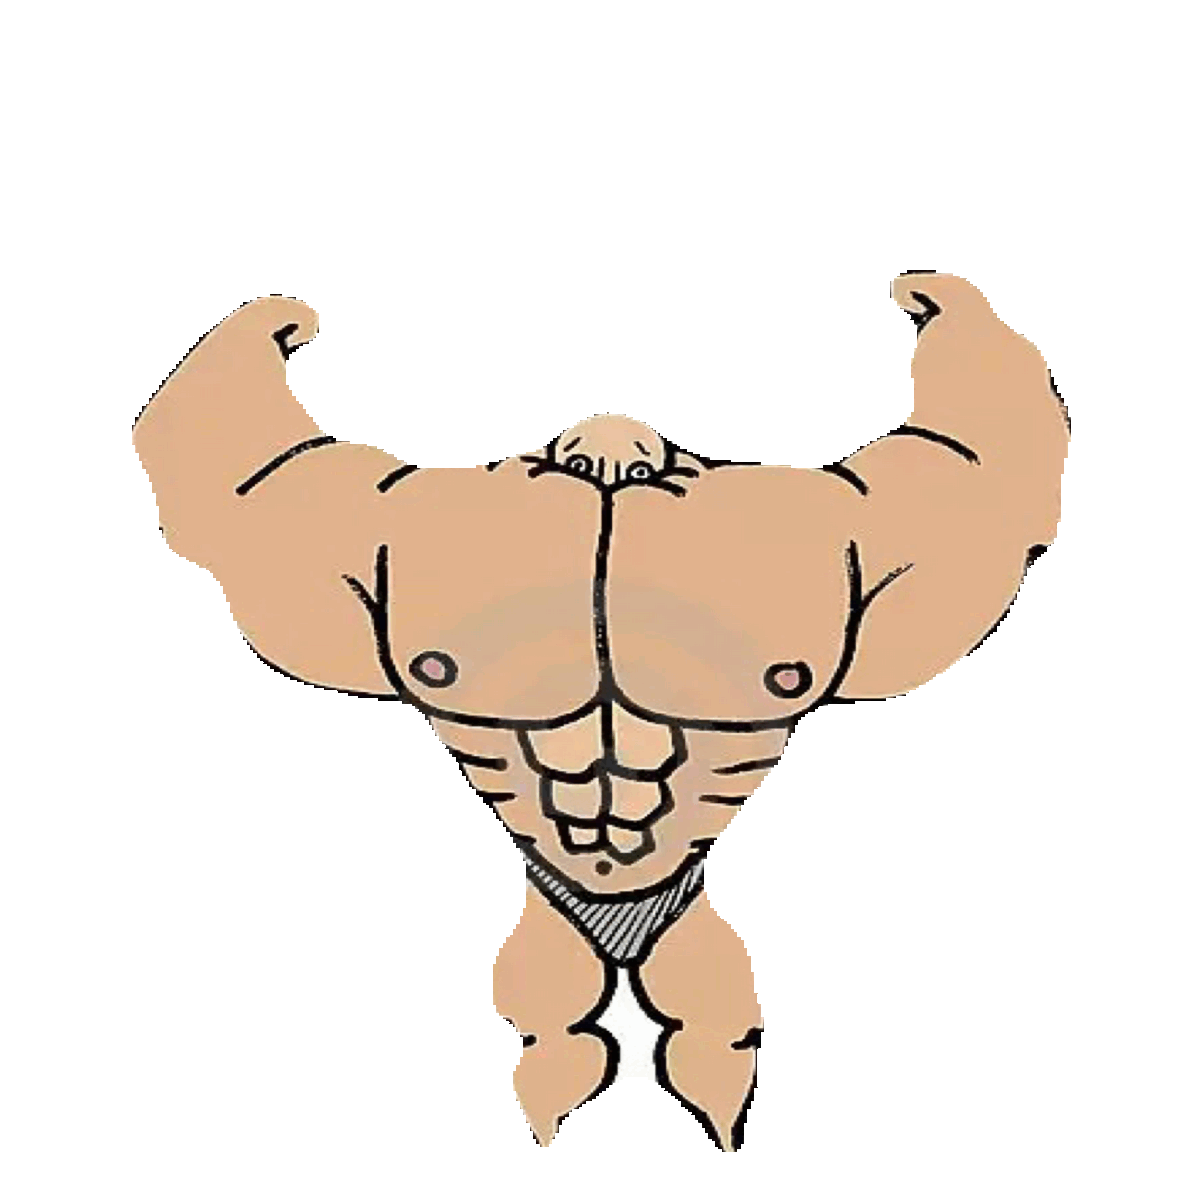 muscles clipart gym